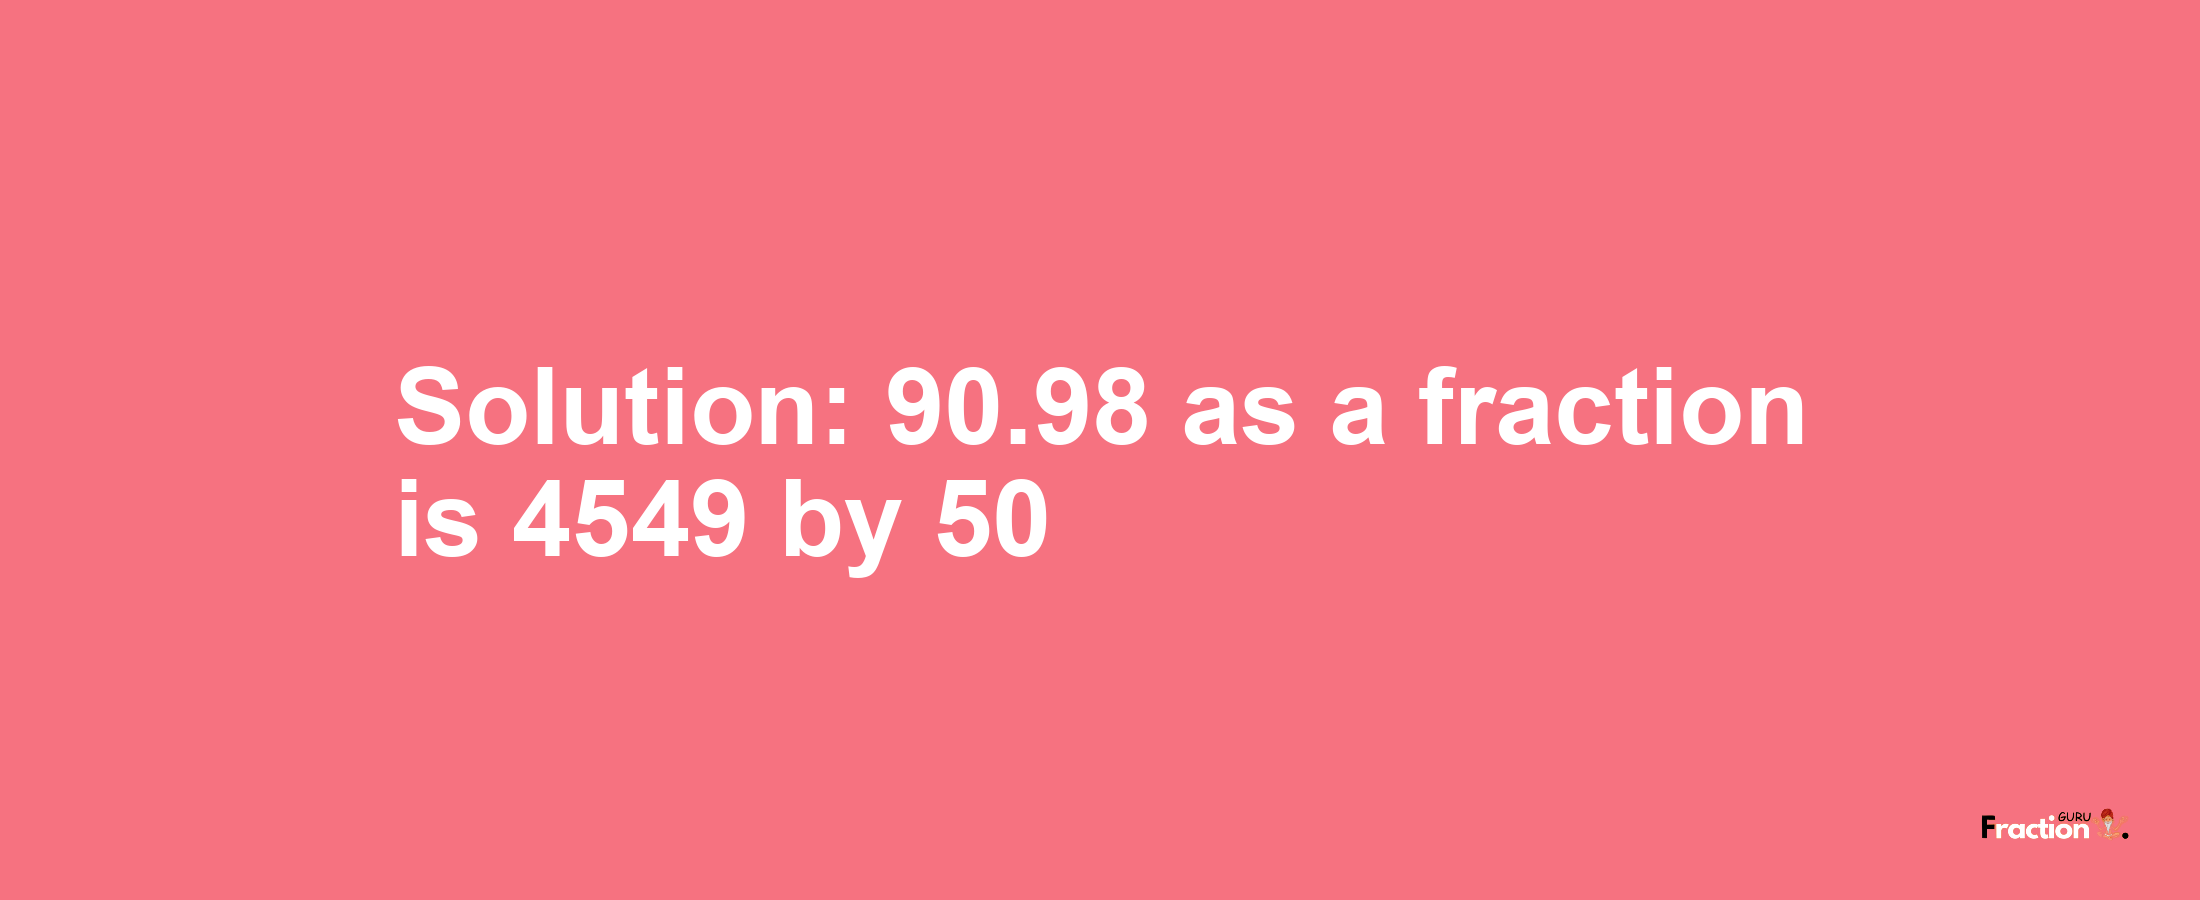 Solution:90.98 as a fraction is 4549/50